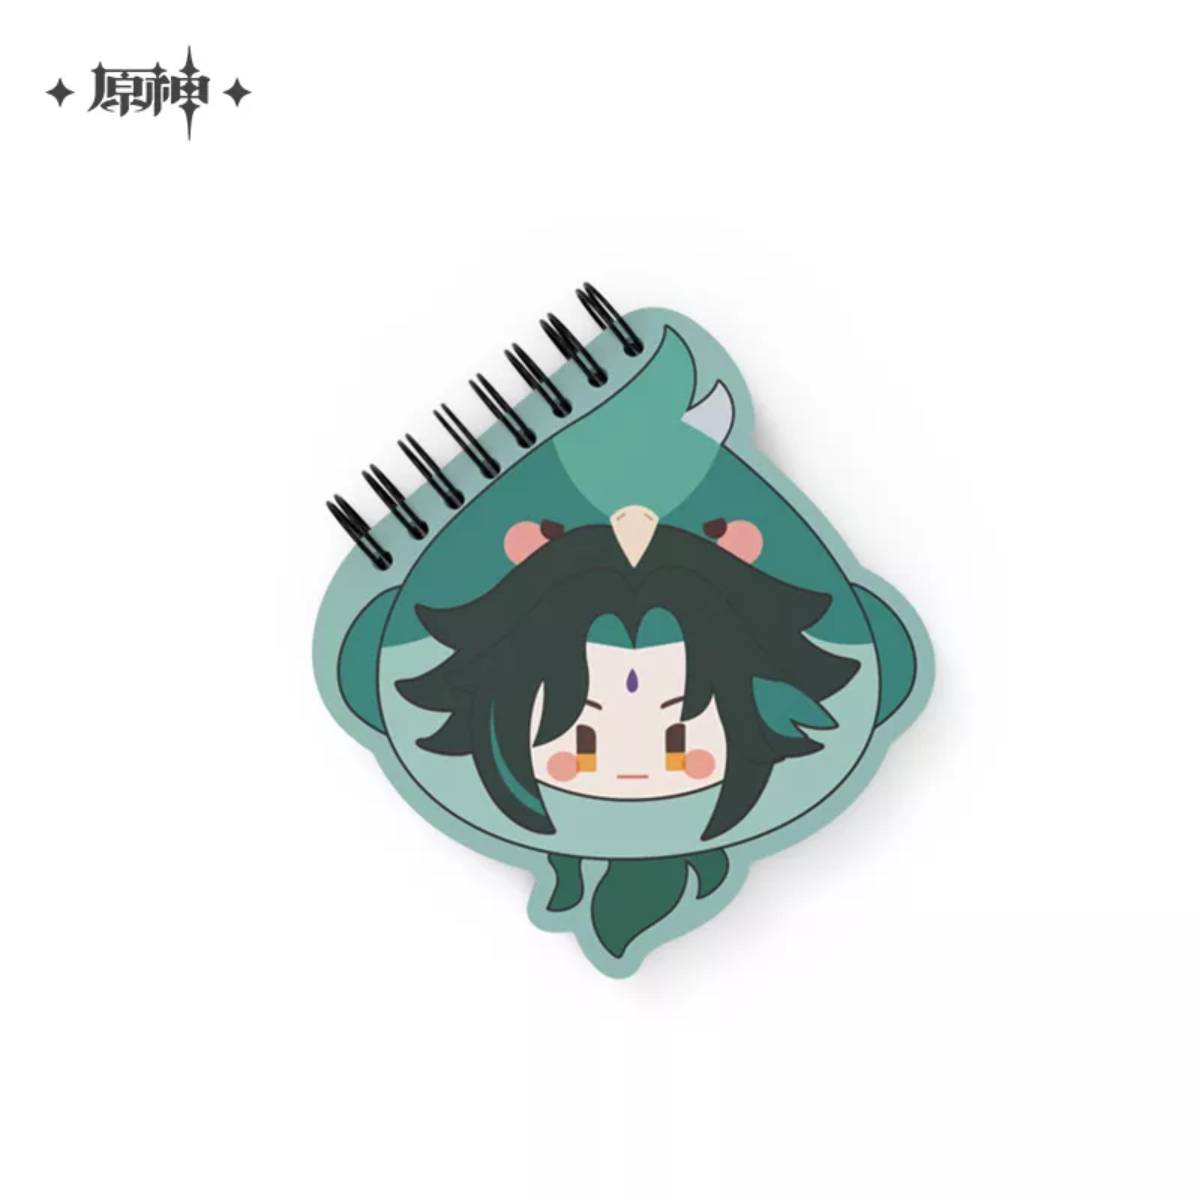 miHoYo Genshin Impact Teyvat Zoo Series Coil Notepad-Xiao-miHoYo-Ace Cards & Collectibles